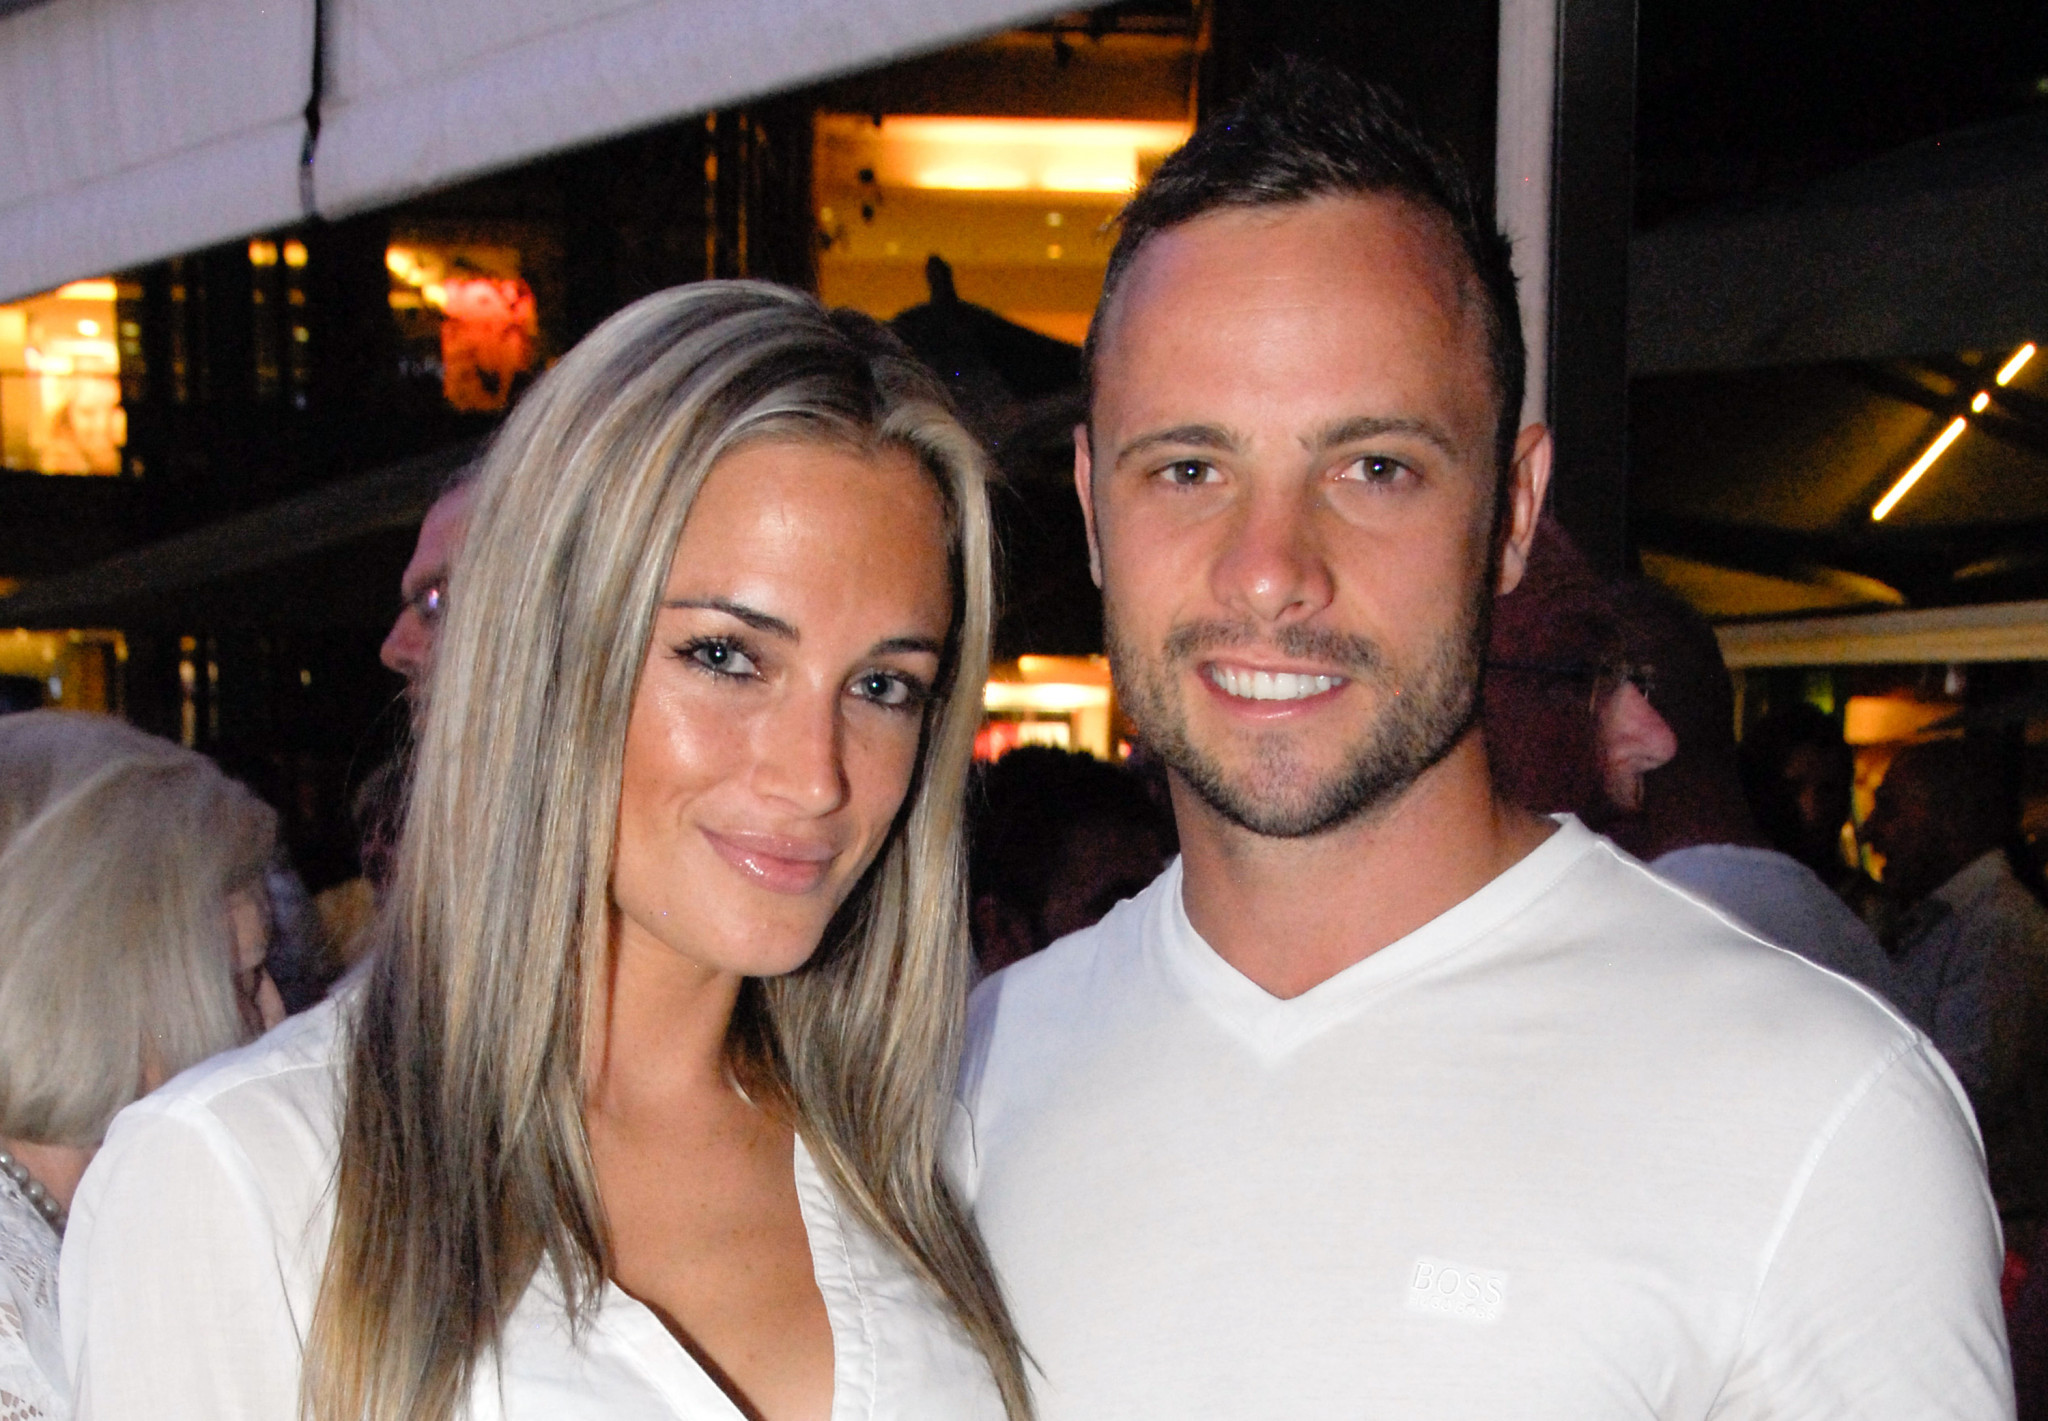 BBC removes Pistorius documentary trailer after criticism over failing to name Steenkamp